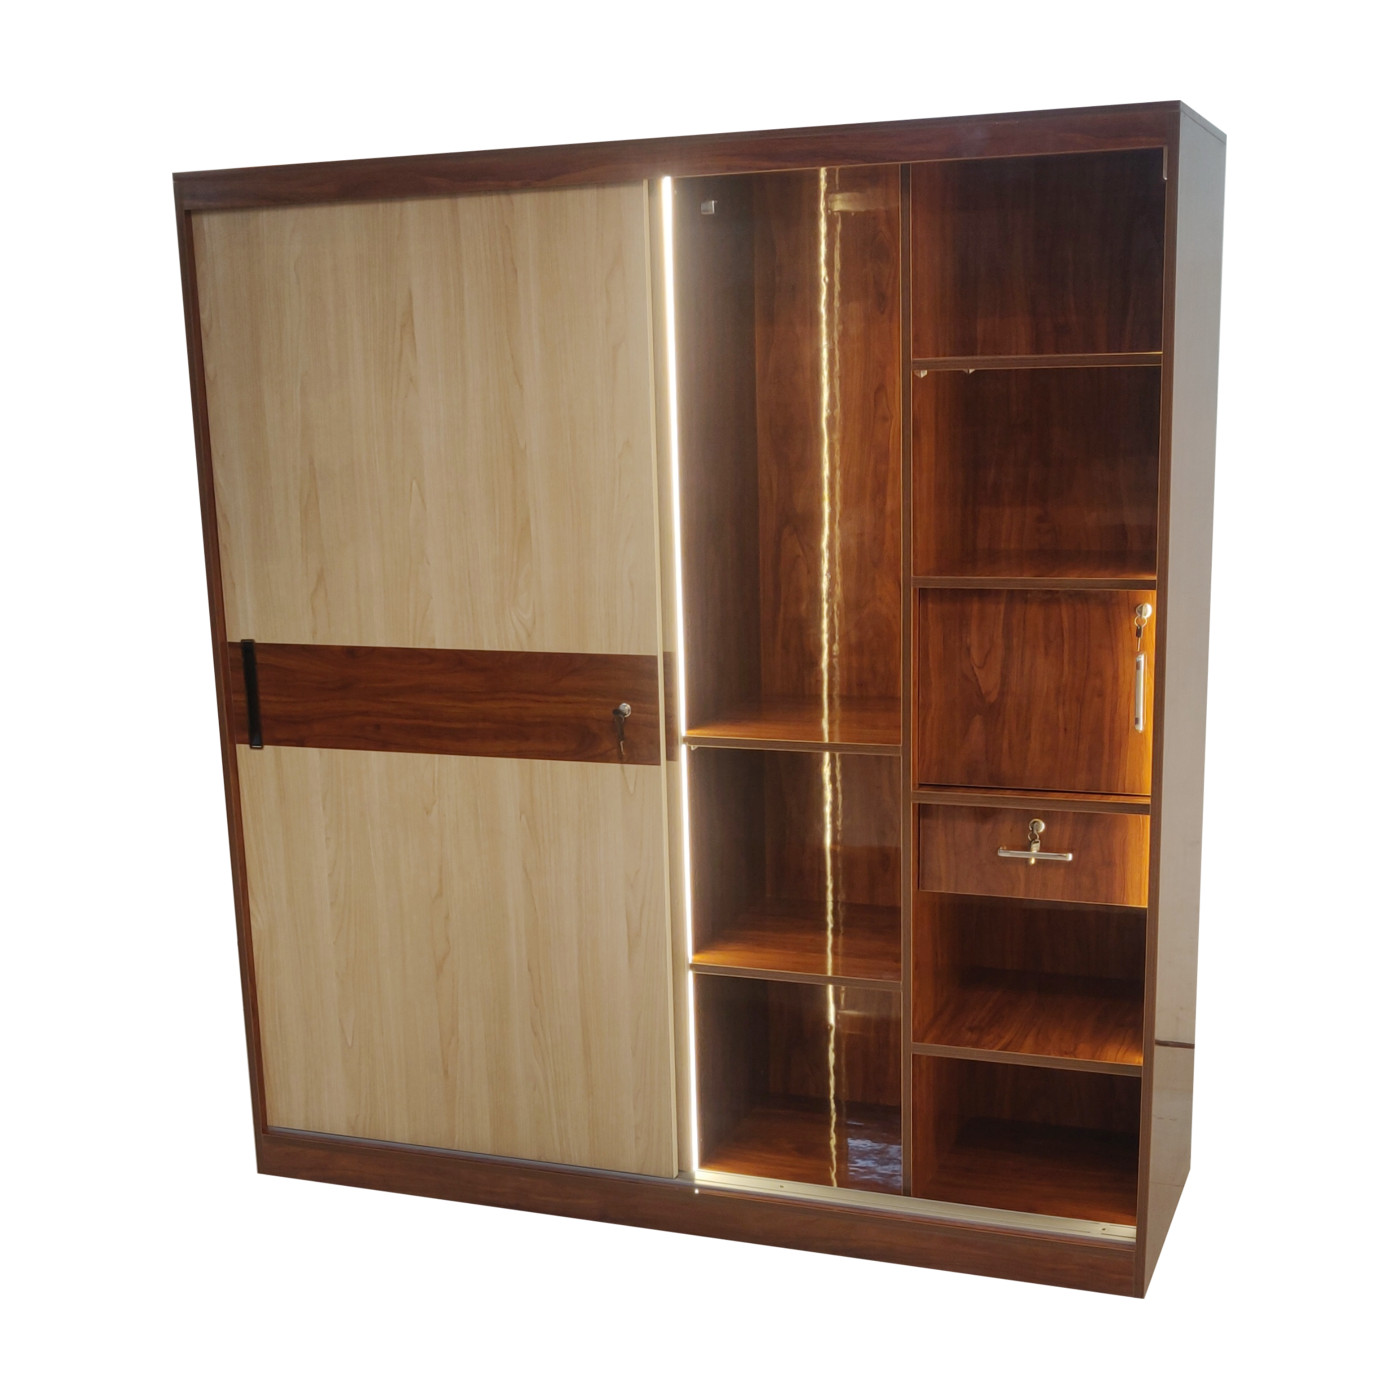 Amaltas Hi Gloss Slider Wardrobe in Mica and Ply ~ With Profile Lights